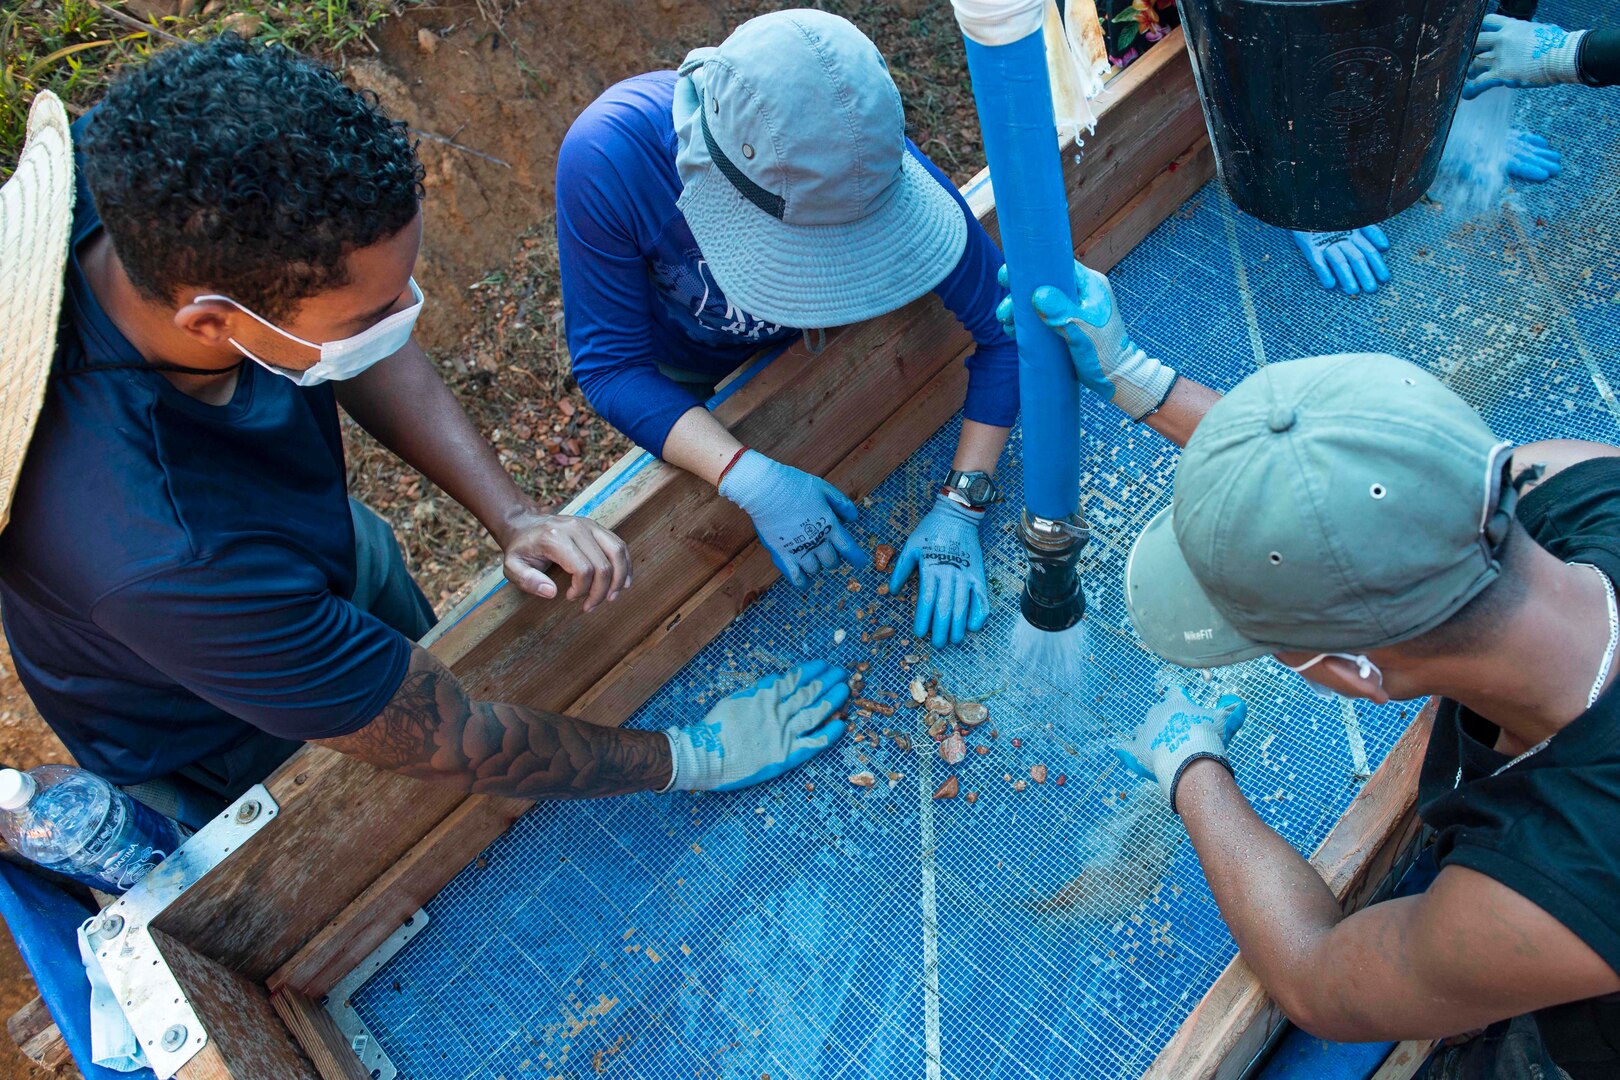 Three people look at debris in a large sieve as one person sprays it with a large hose.